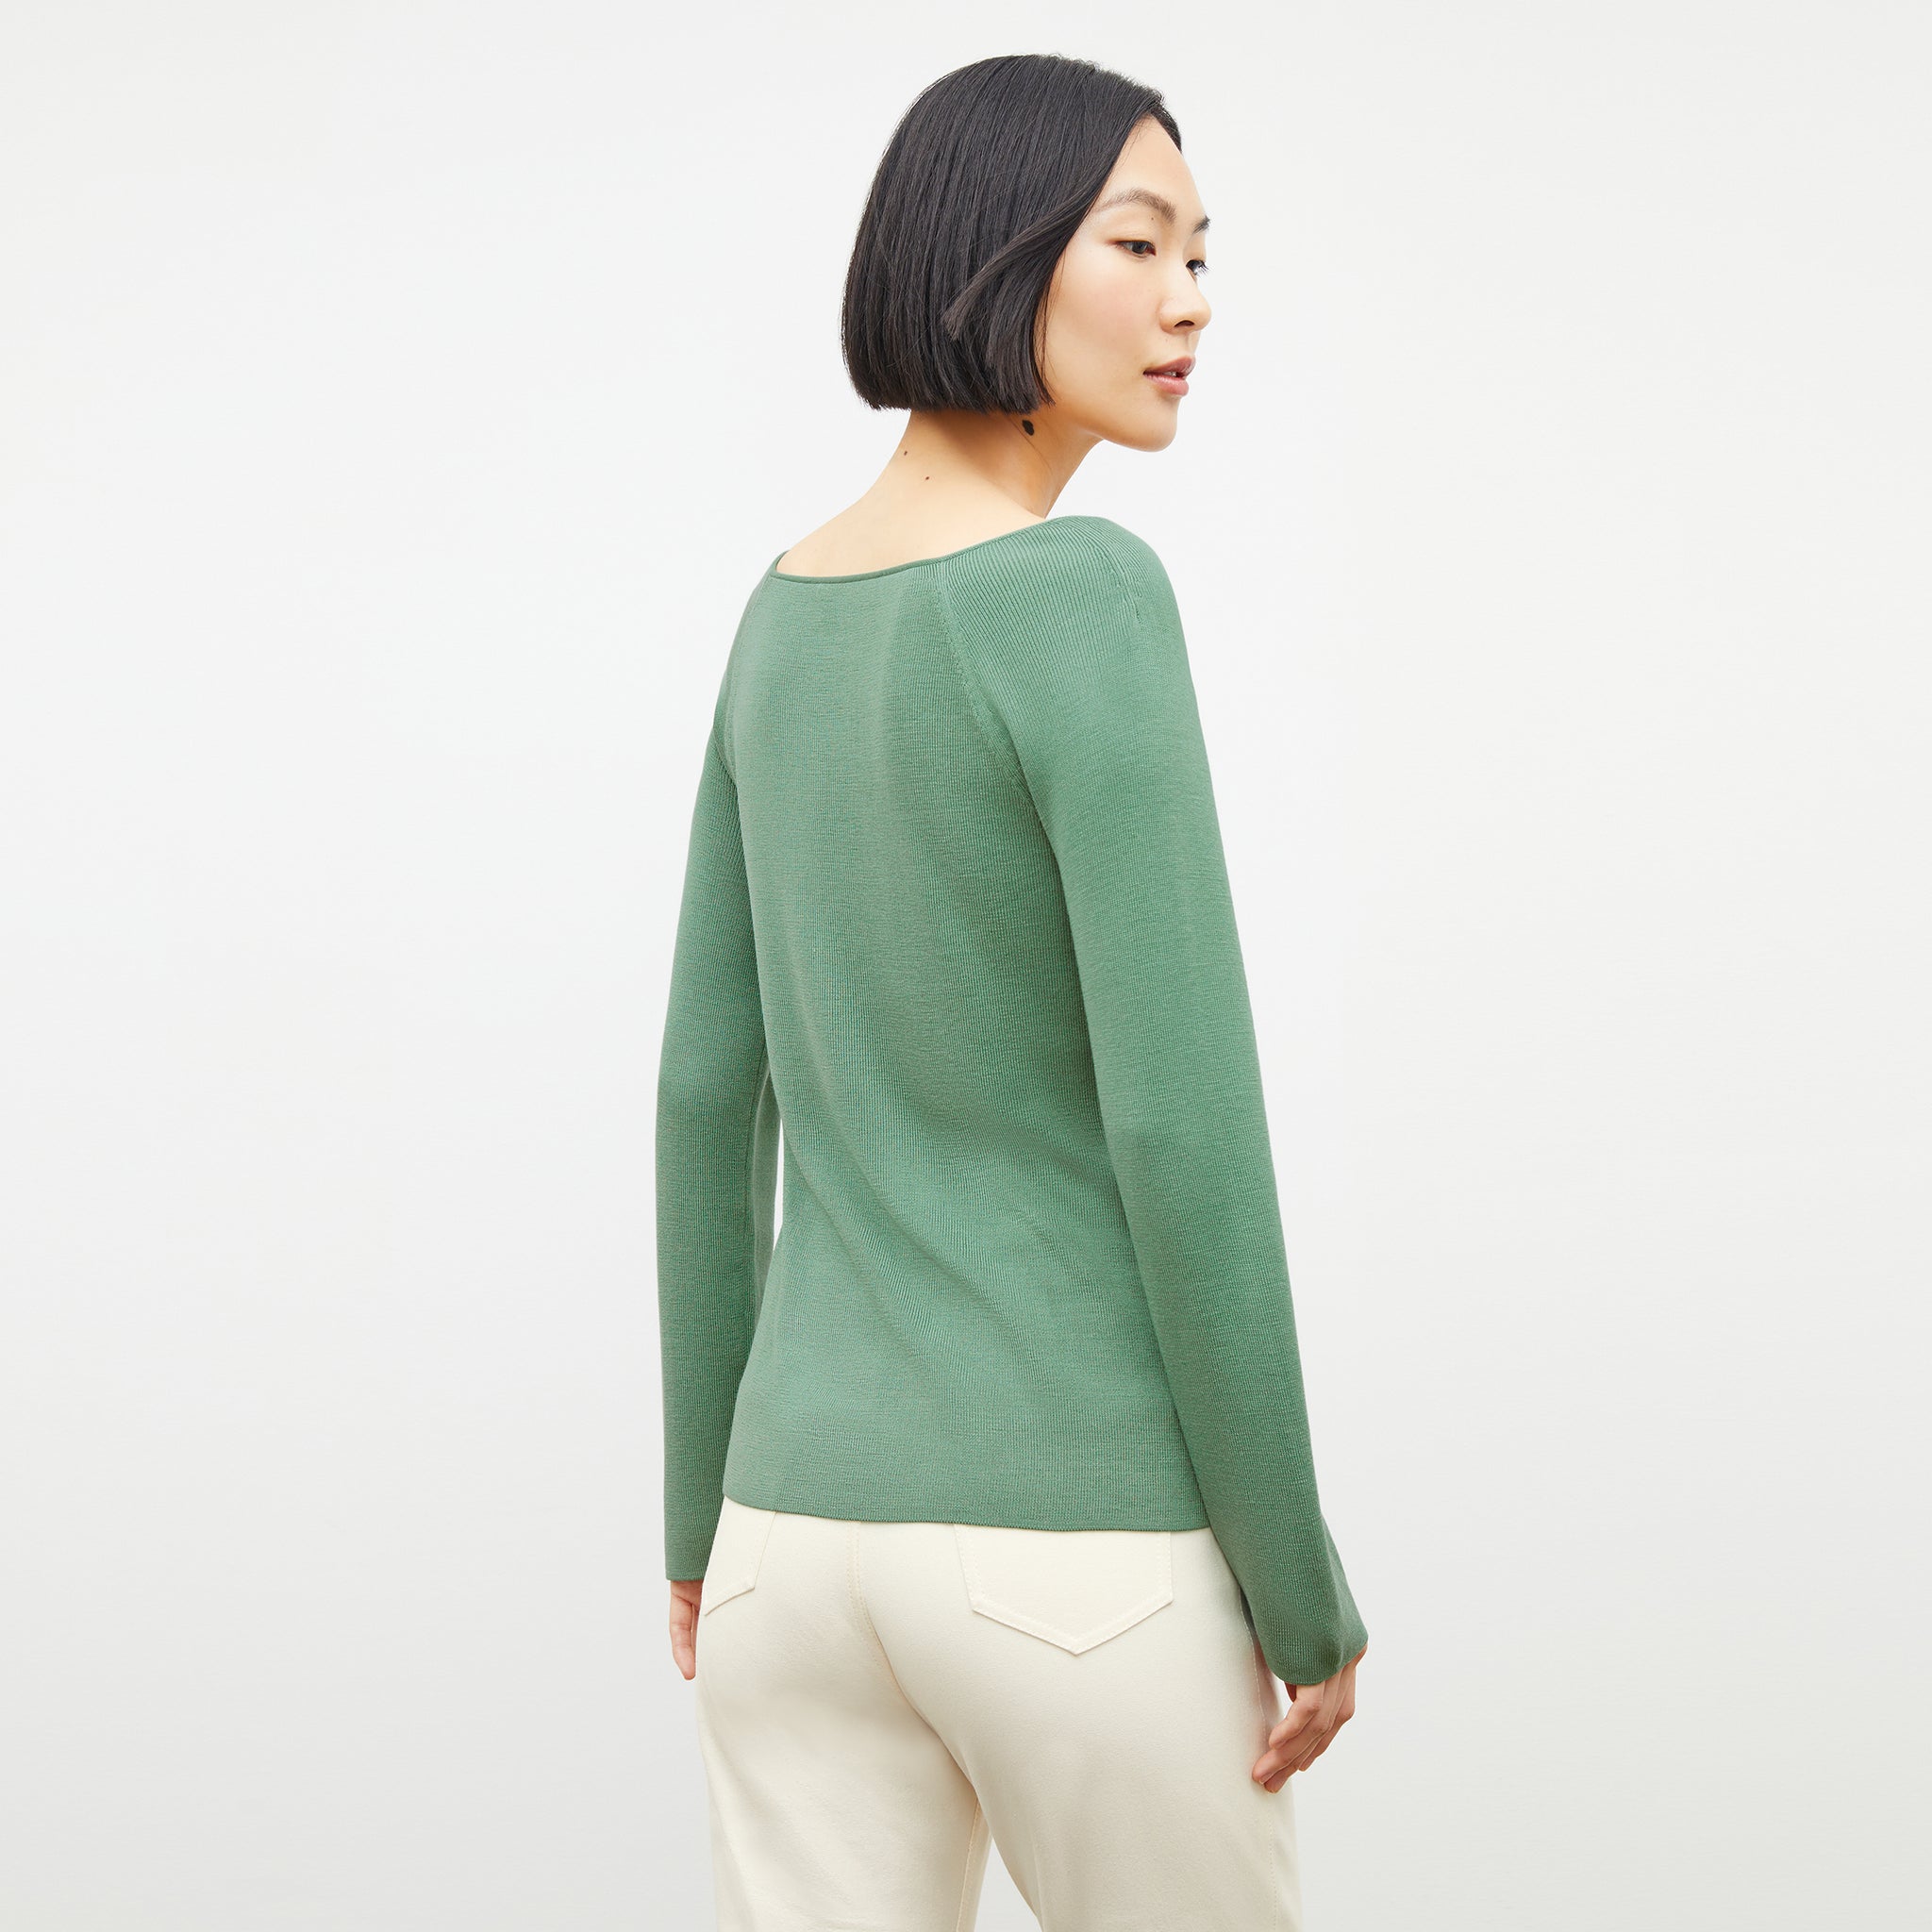 Back image of a woman wearing the joya top in spring green